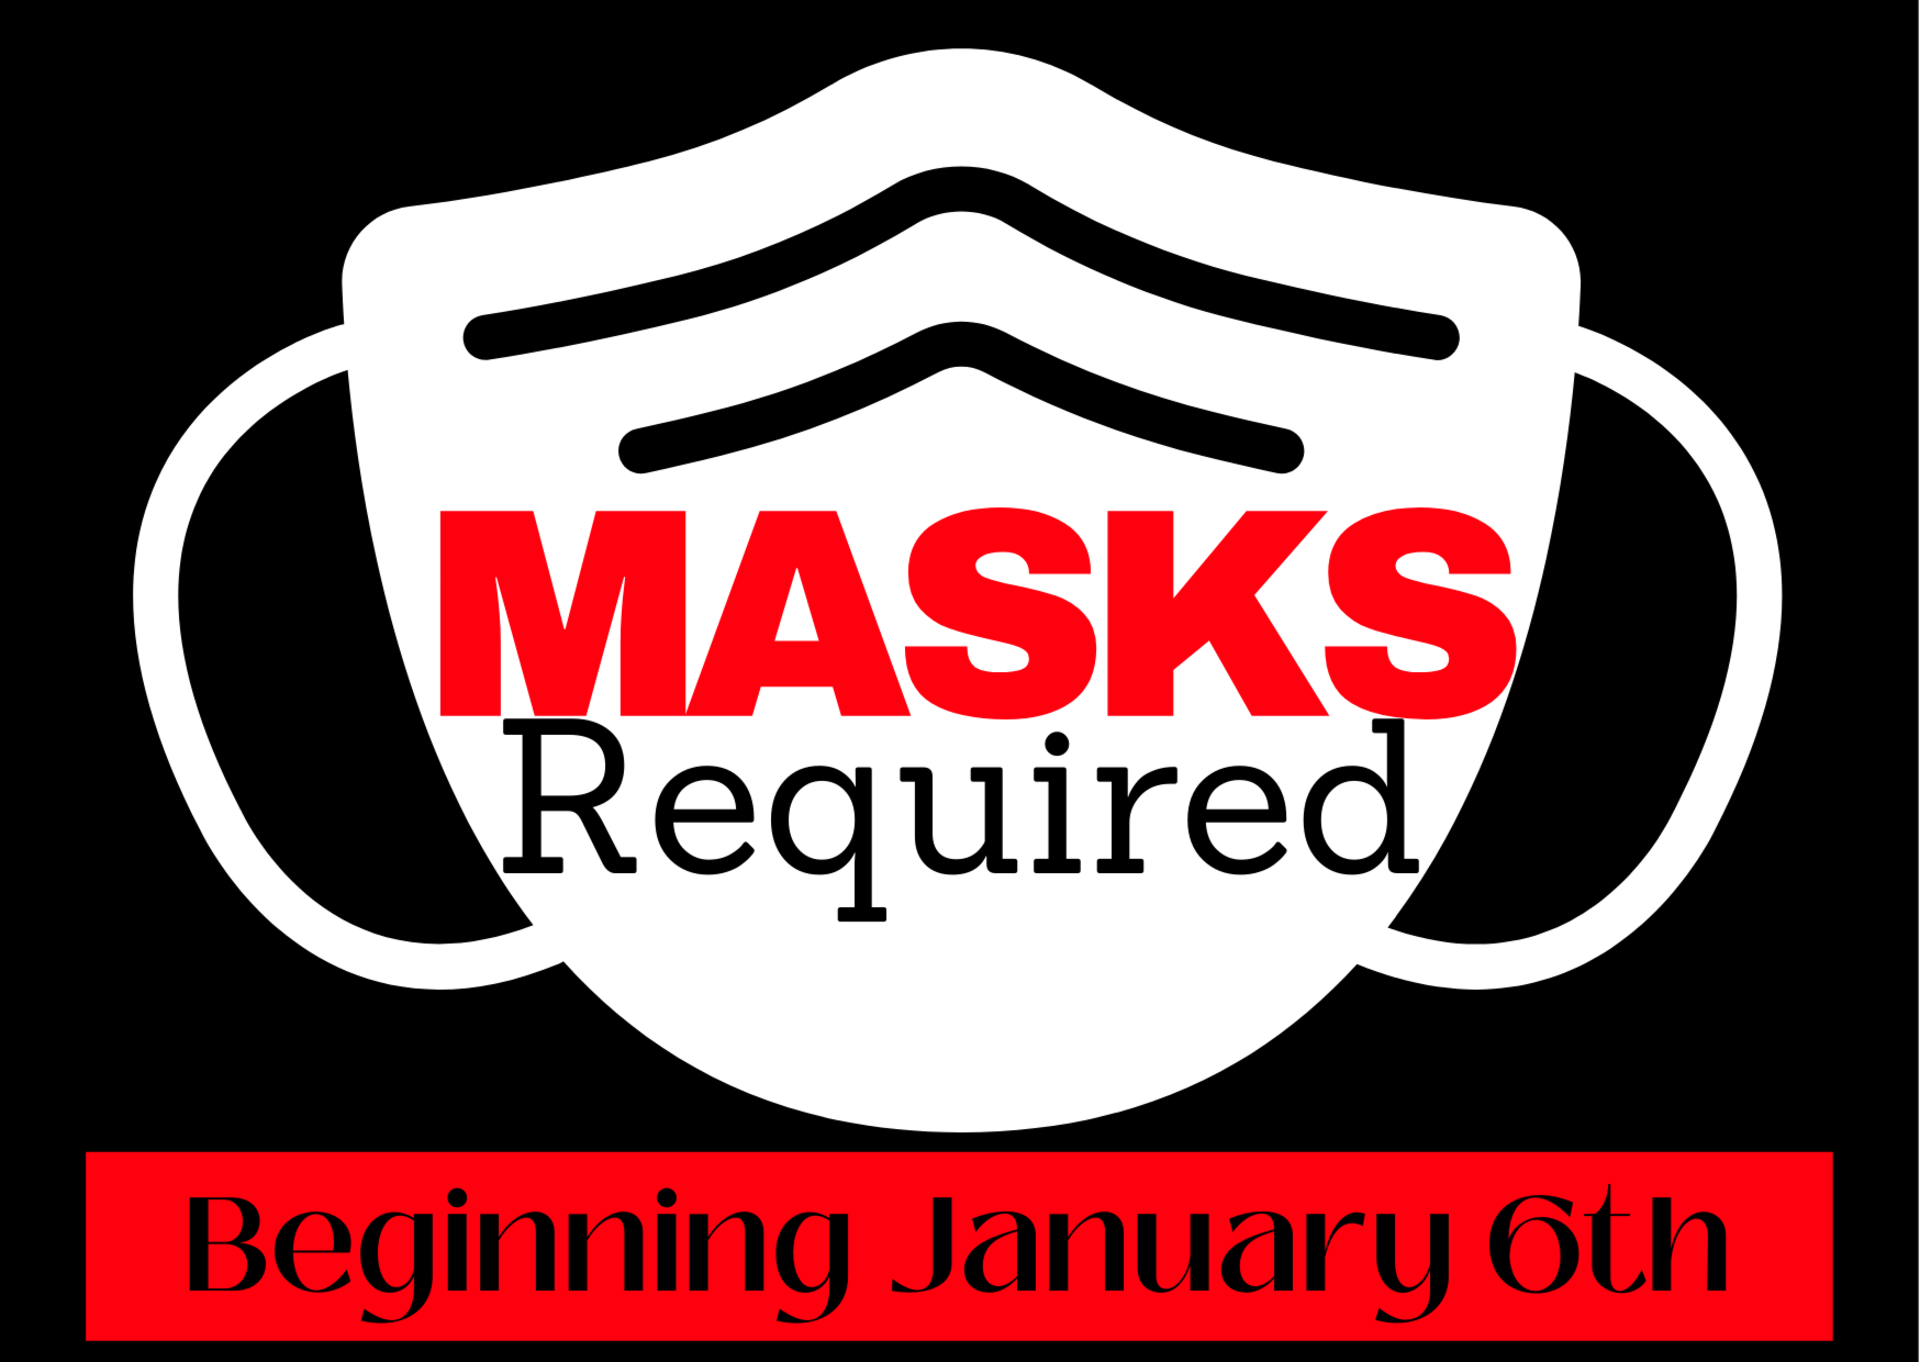 Masks are required beginning January 6th